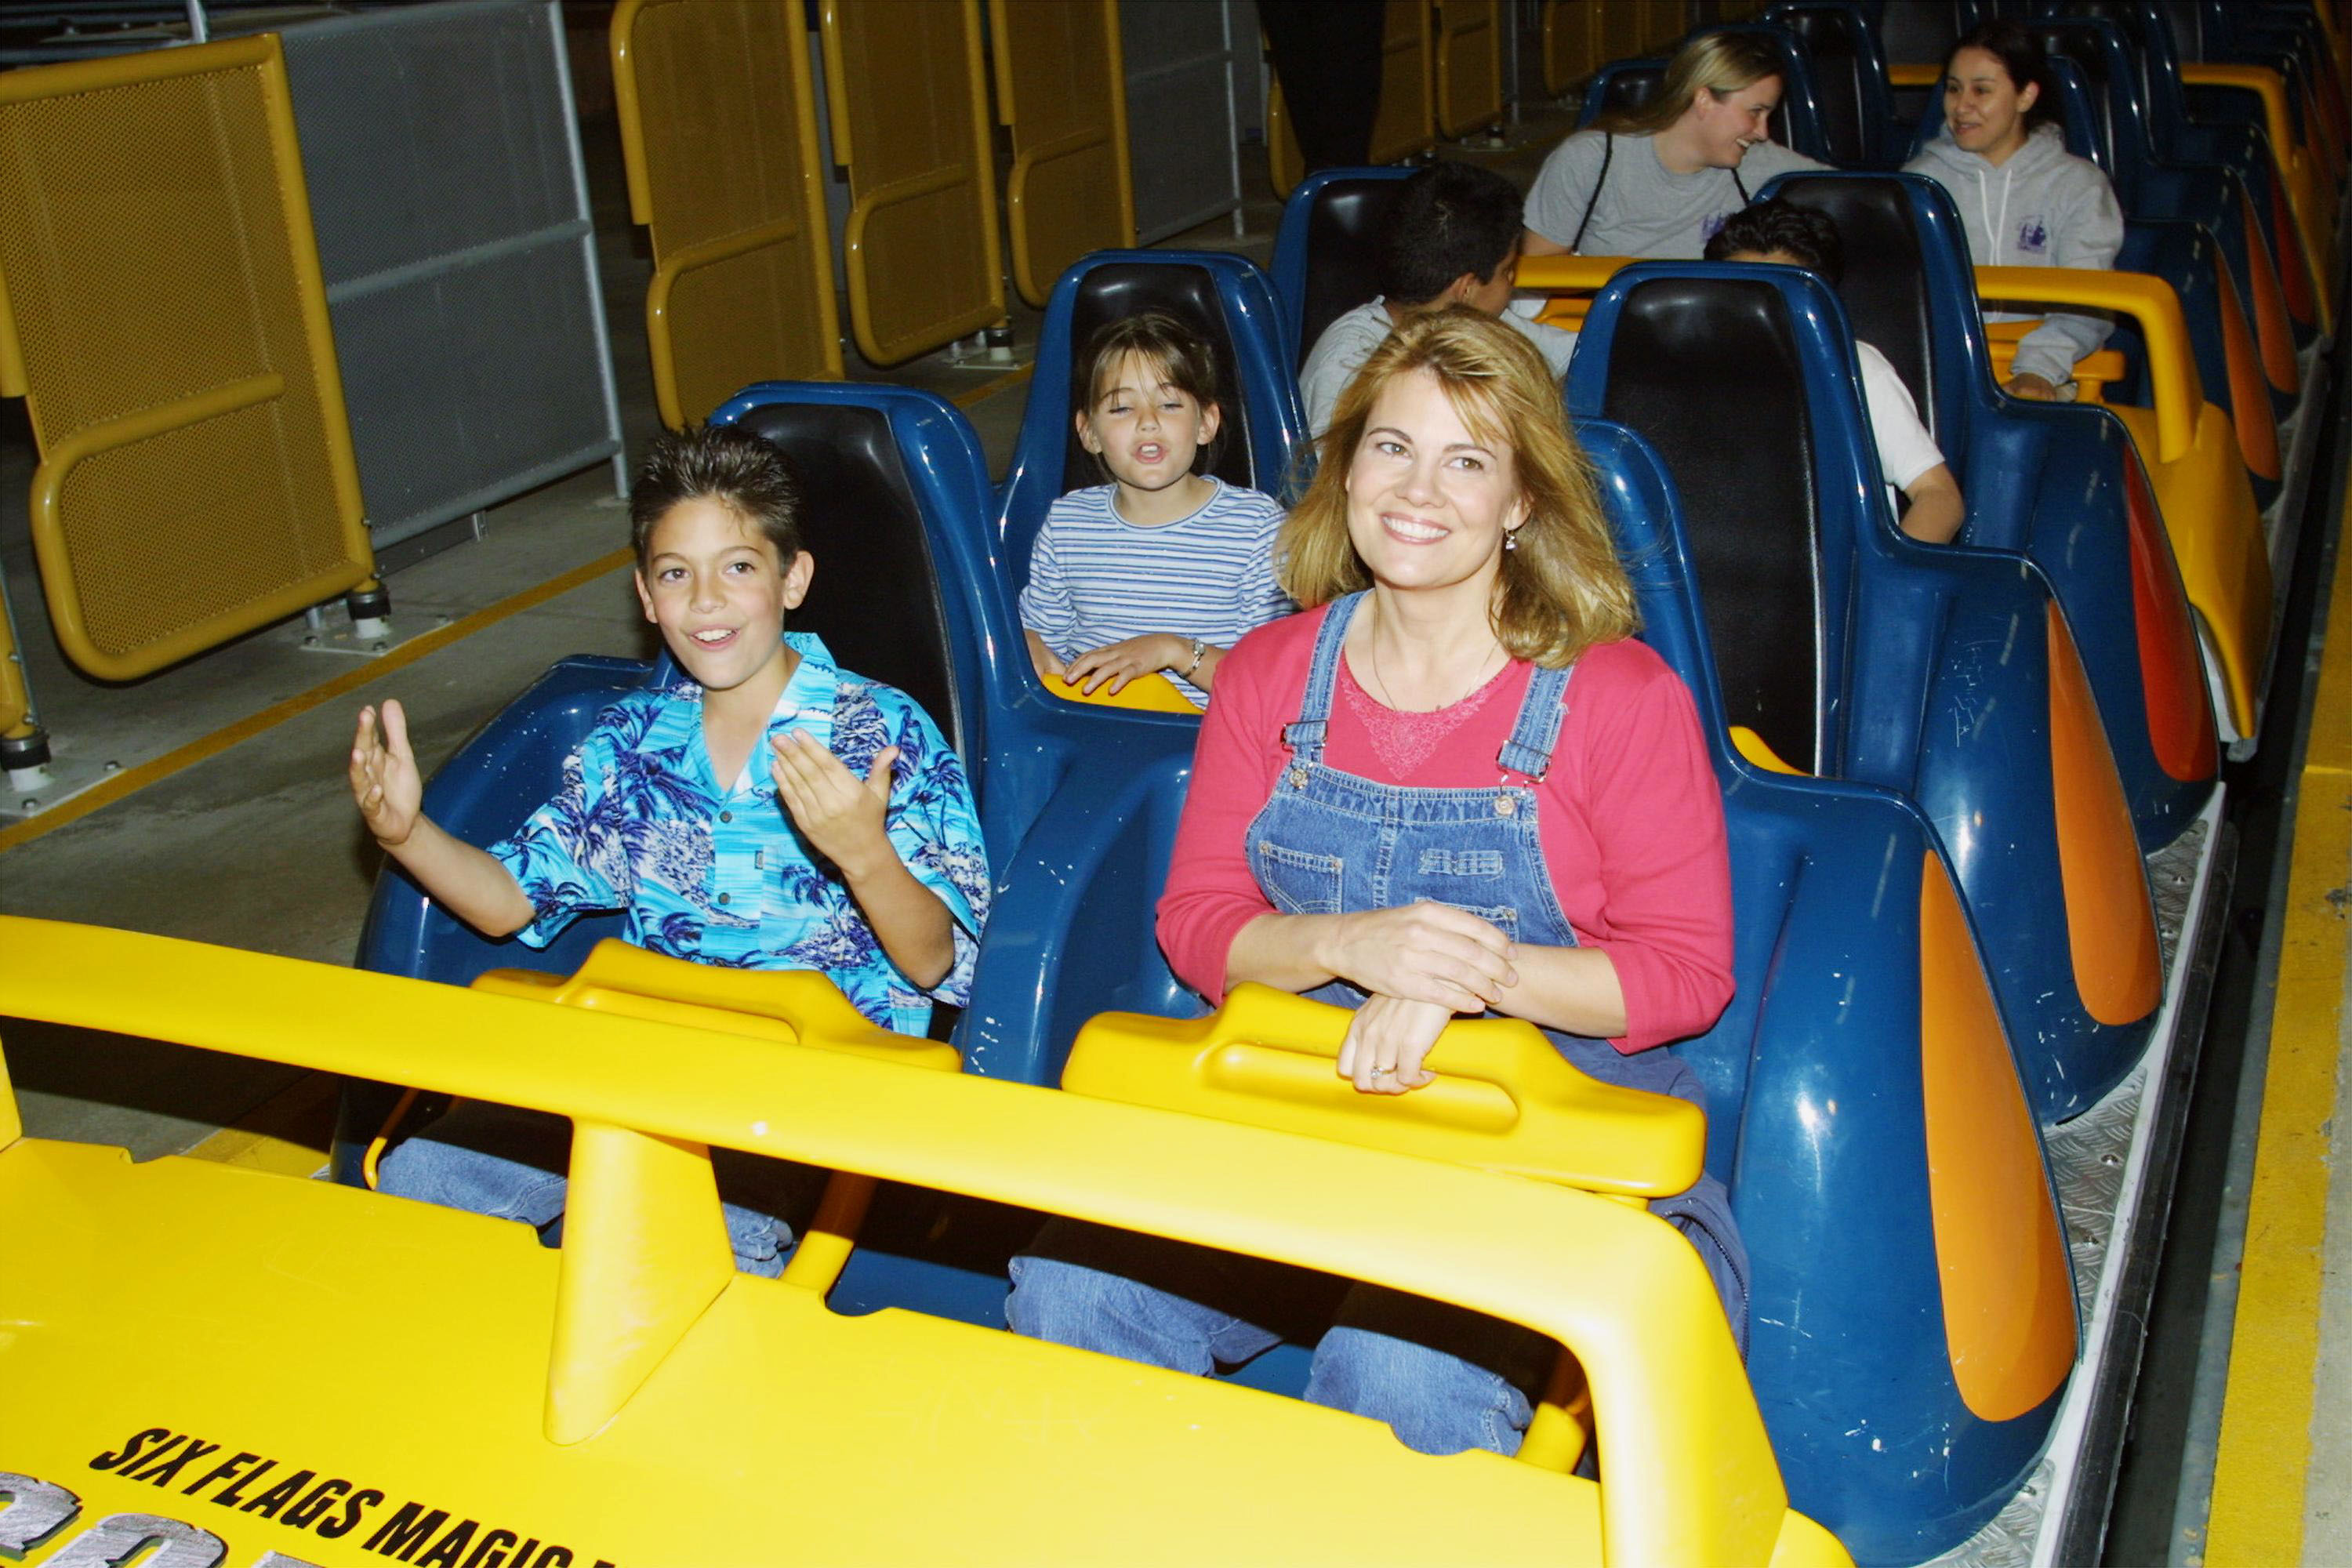 Lisa Whelchel and Tucker Cauble on a roller coaster at Six Flags Magic Mountain on March 29, 2001 in Valencia, California. | Source: Getty Images